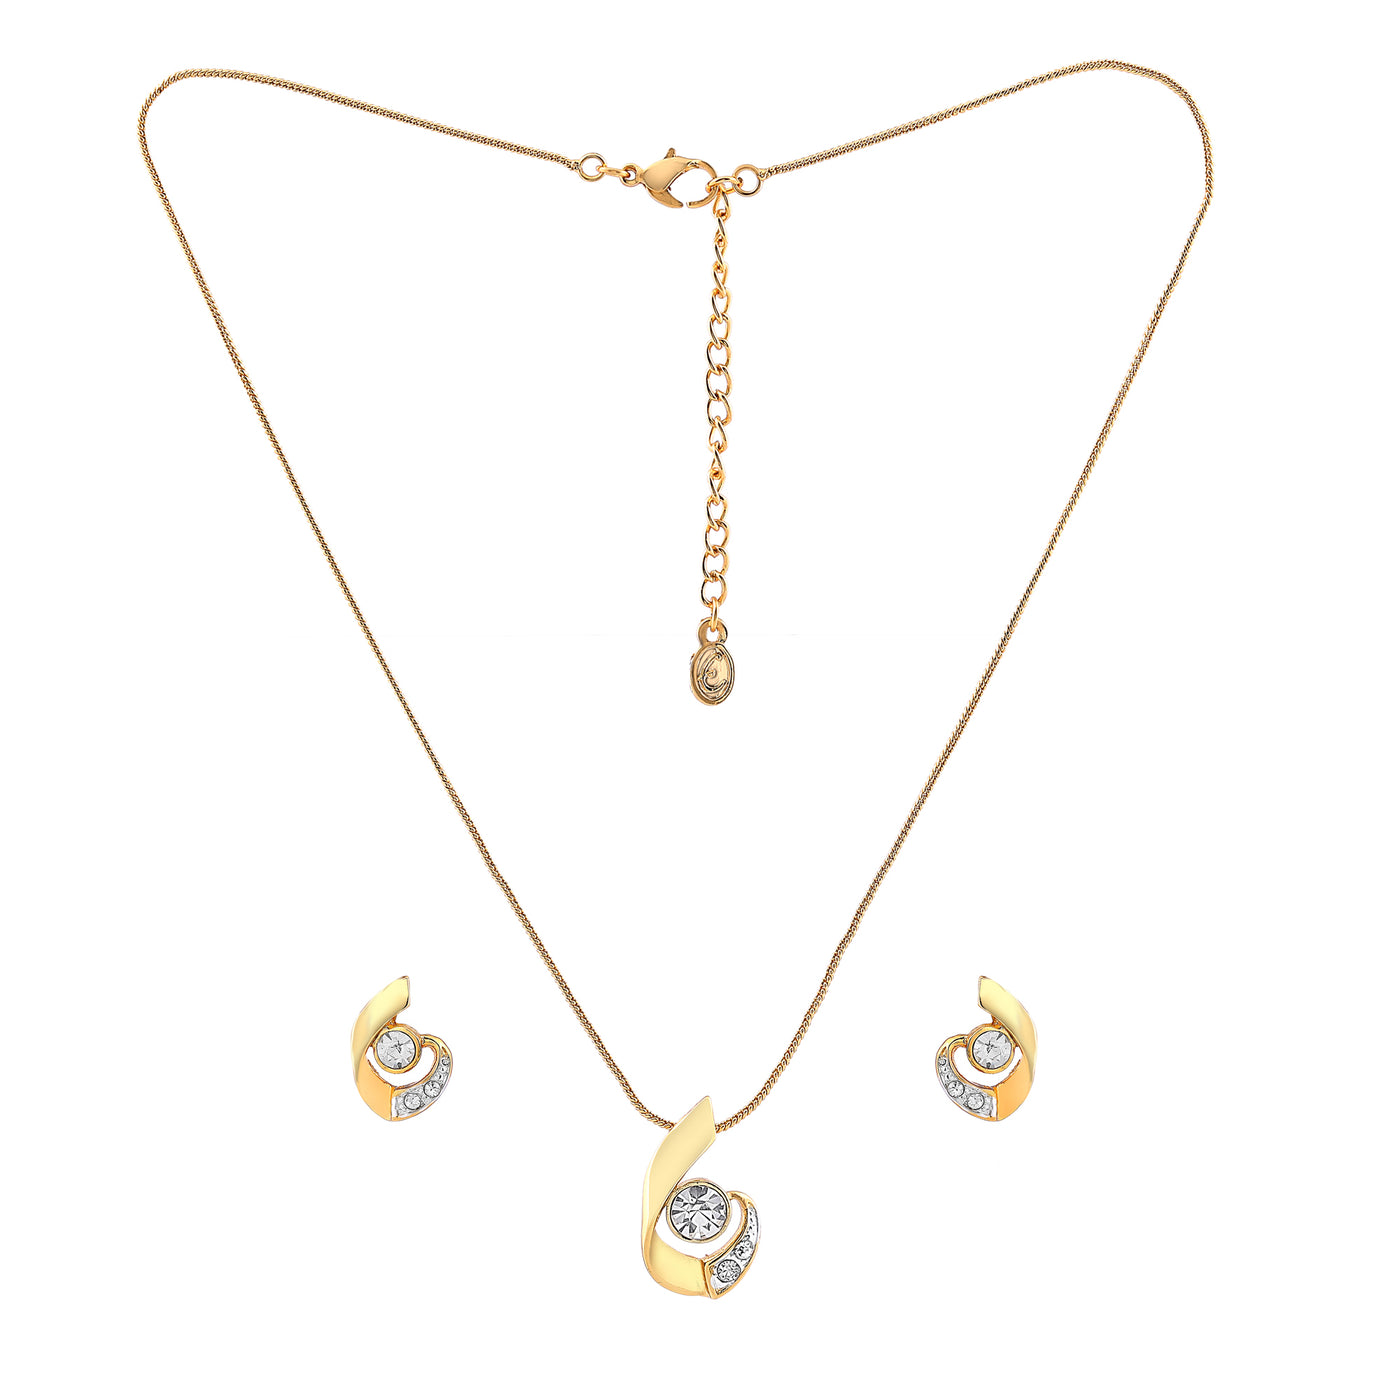 Estele 24 Kt Gold Plated with Austrian Crystal Necklace Set for Women